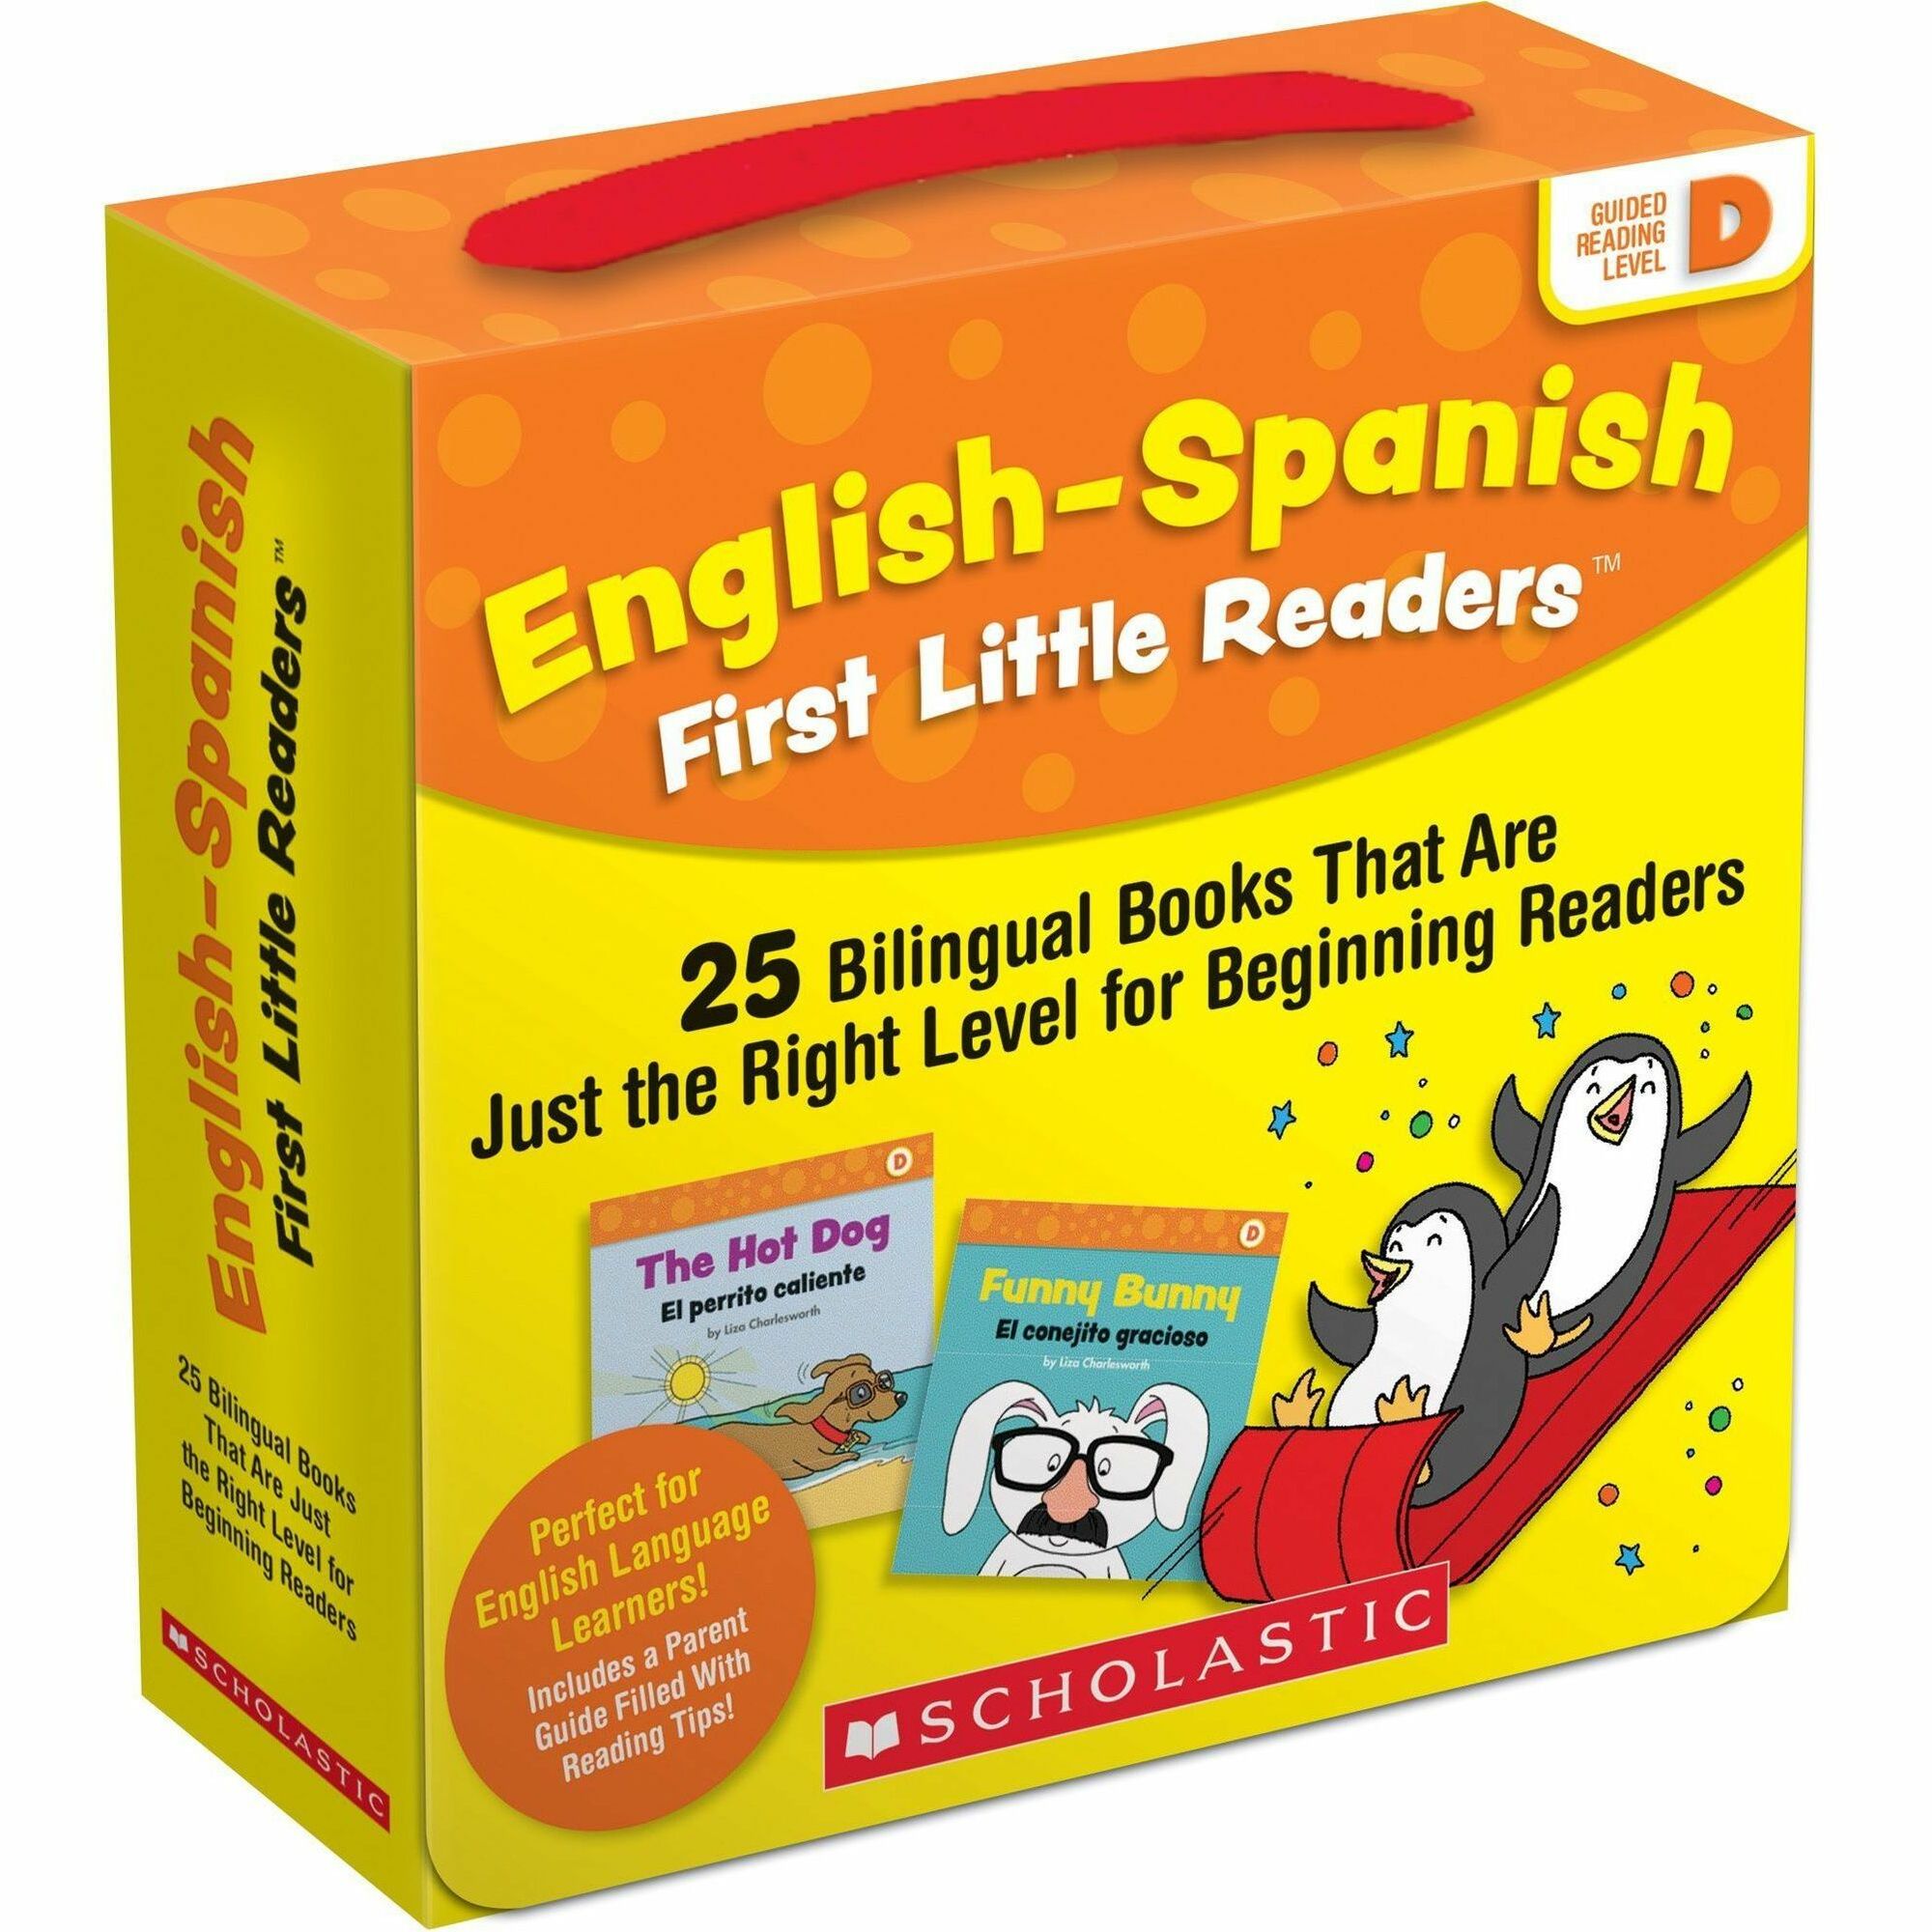 scholastic-first-little-readers-book-set-printed-book-by-liza-charlesworth-8-pages-scholastic-teaching-resources-publication-july-1-2020-book-grade-preschool-2-english-spanish_shs1338662104 - 1